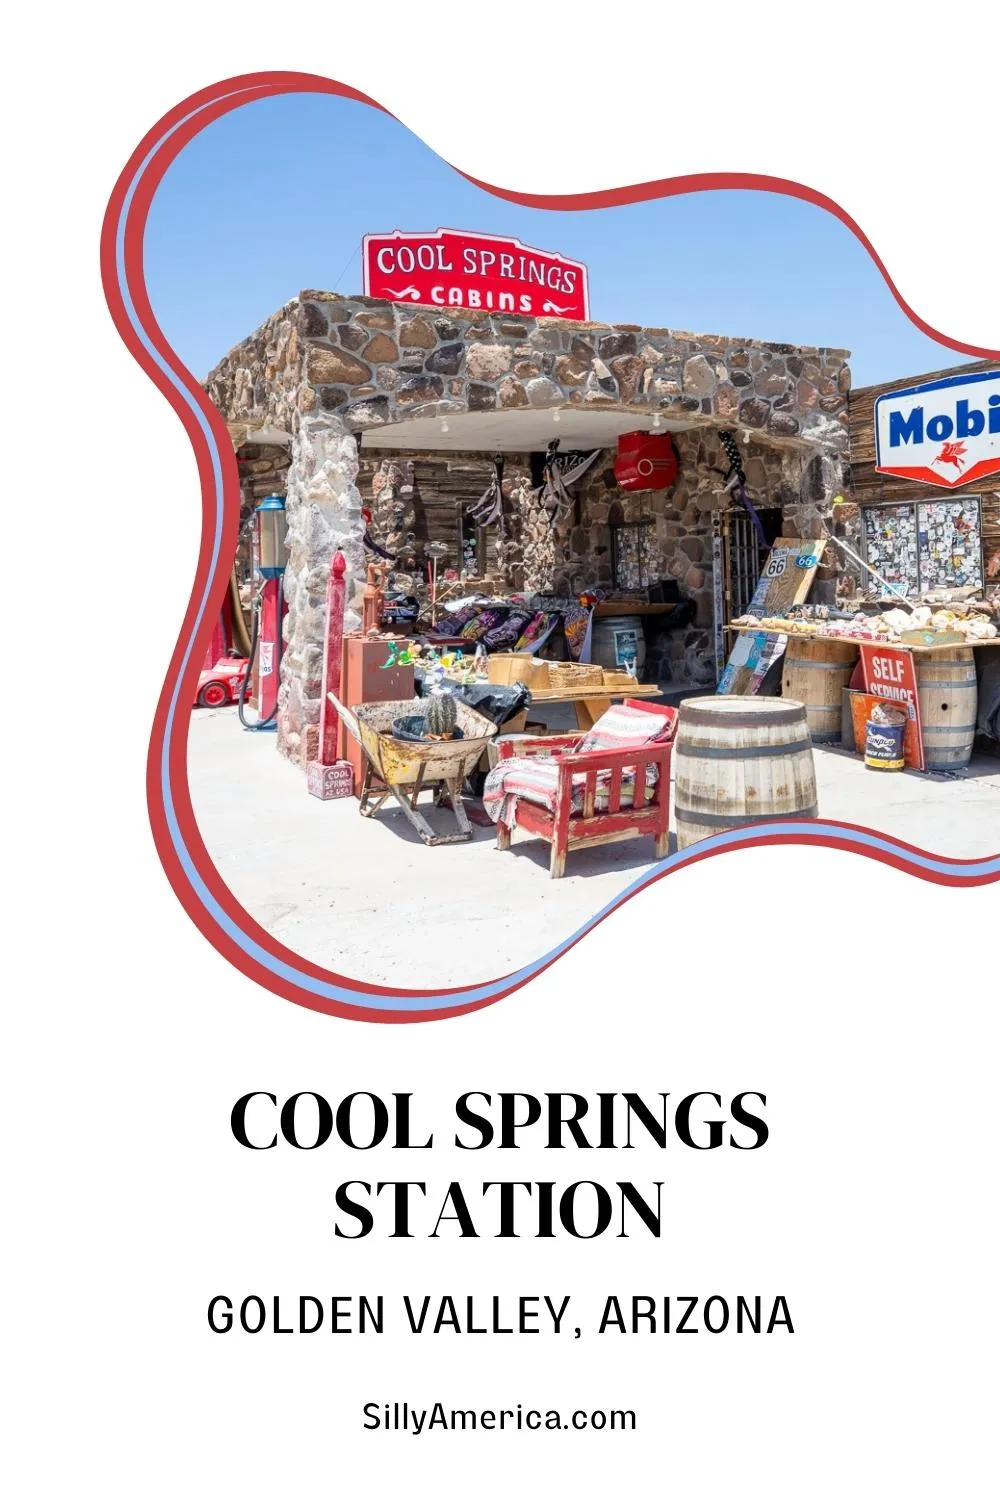 Cool Springs Station in Golden Valley, Arizona is the last place to pull over over before driving the winding mountainous road through the Black Mountains up Sitgreaves Pass to Oatman. Stop at this historic gas station for Route 66 souvenirs or a snack break on your road trip. Visit this fun Route 66 roadside attraction on your Arizona Route 66 road trip. Add the stop to your travel itinerary. #Route66 #Route66RoadTrip #RoadTrip #RoadsideAttraction #ArizonaRoadsideAttraction #ArizonaRoute66